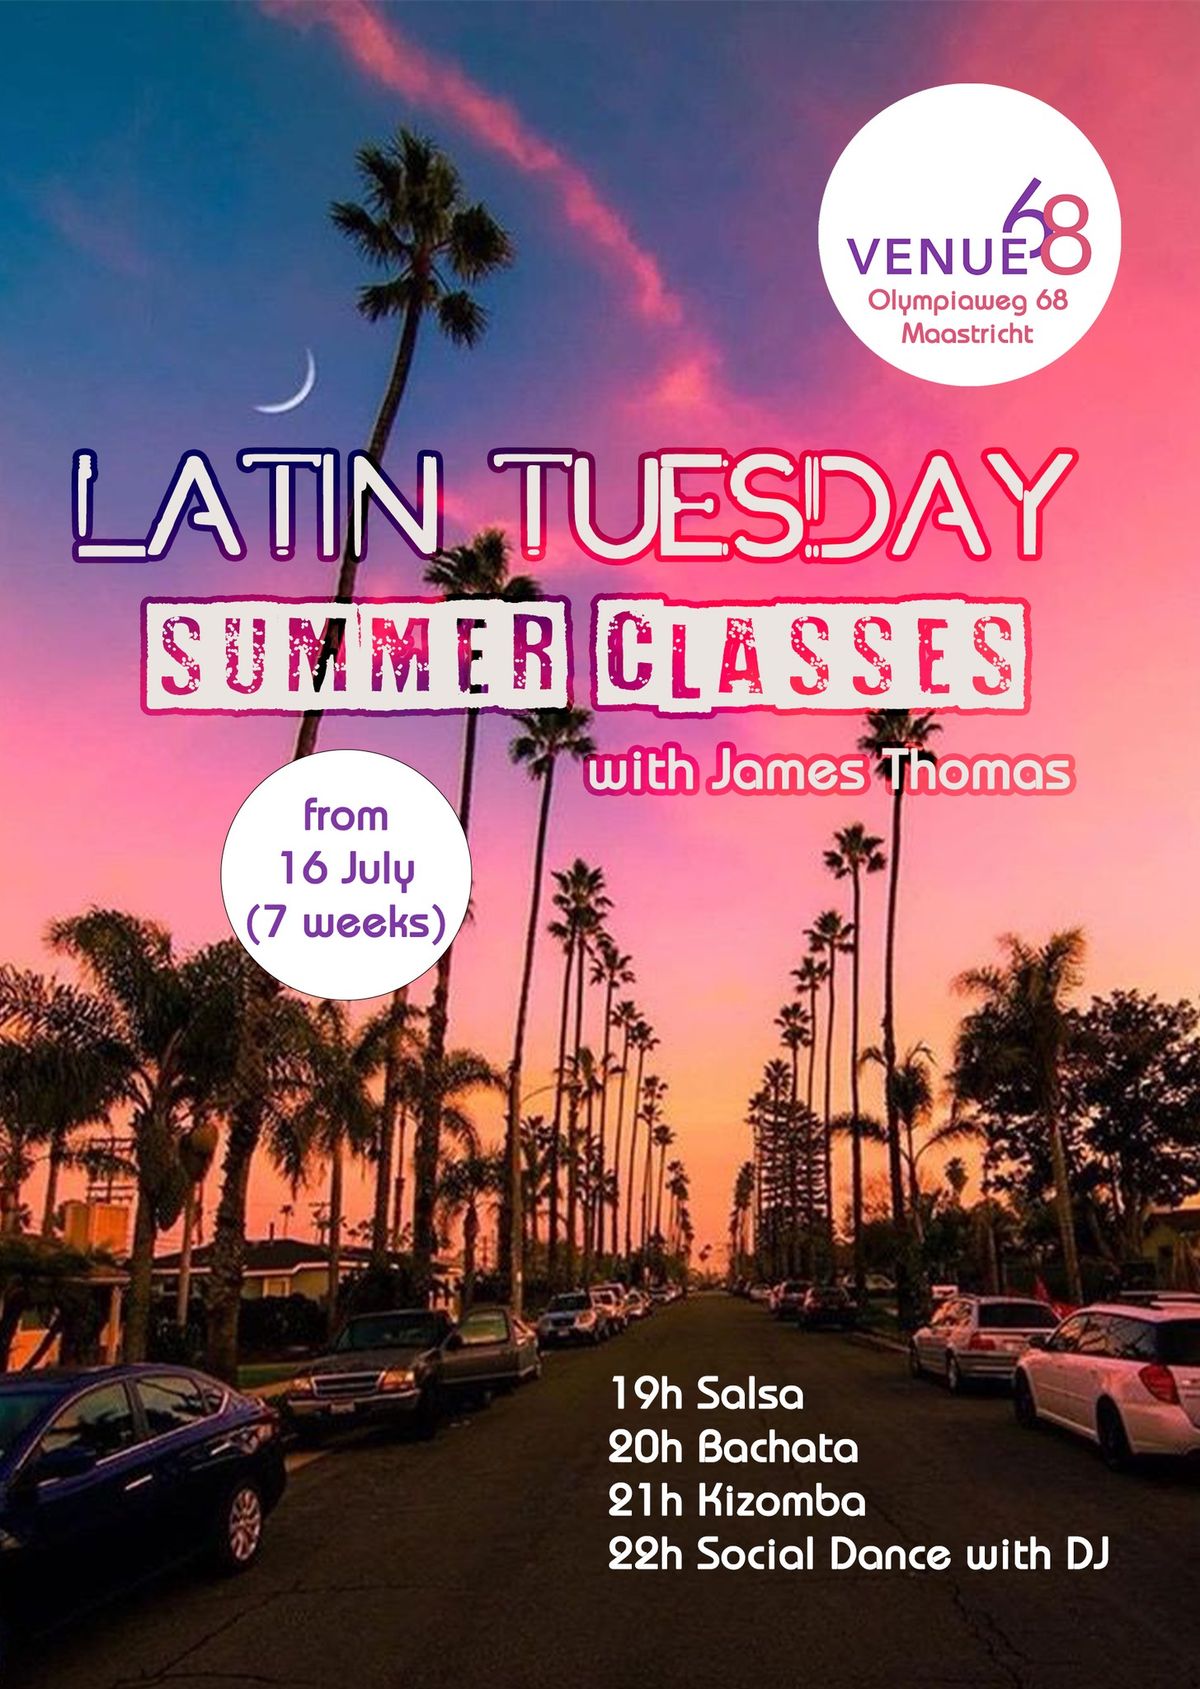 Summer Classes on Tuesday July 16th #Latin Tuesday #Venue 68